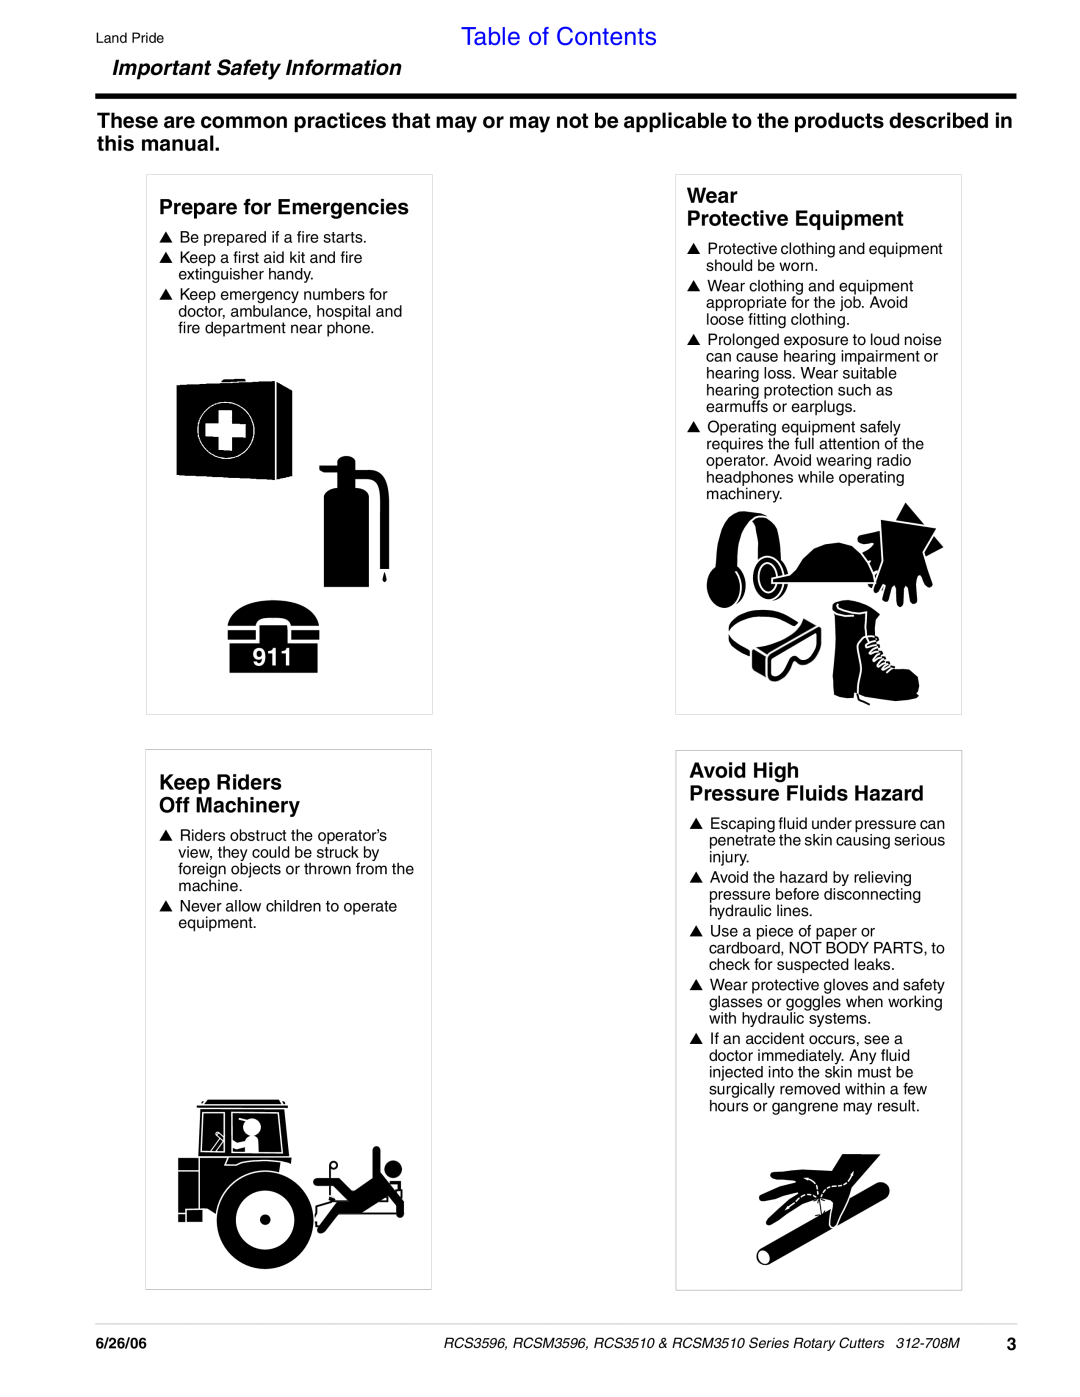 Land Pride RCS3596 manual Prepare for Emergencies, Wear Protective Equipment, Keep Riders Off Machinery, Table of Contents 